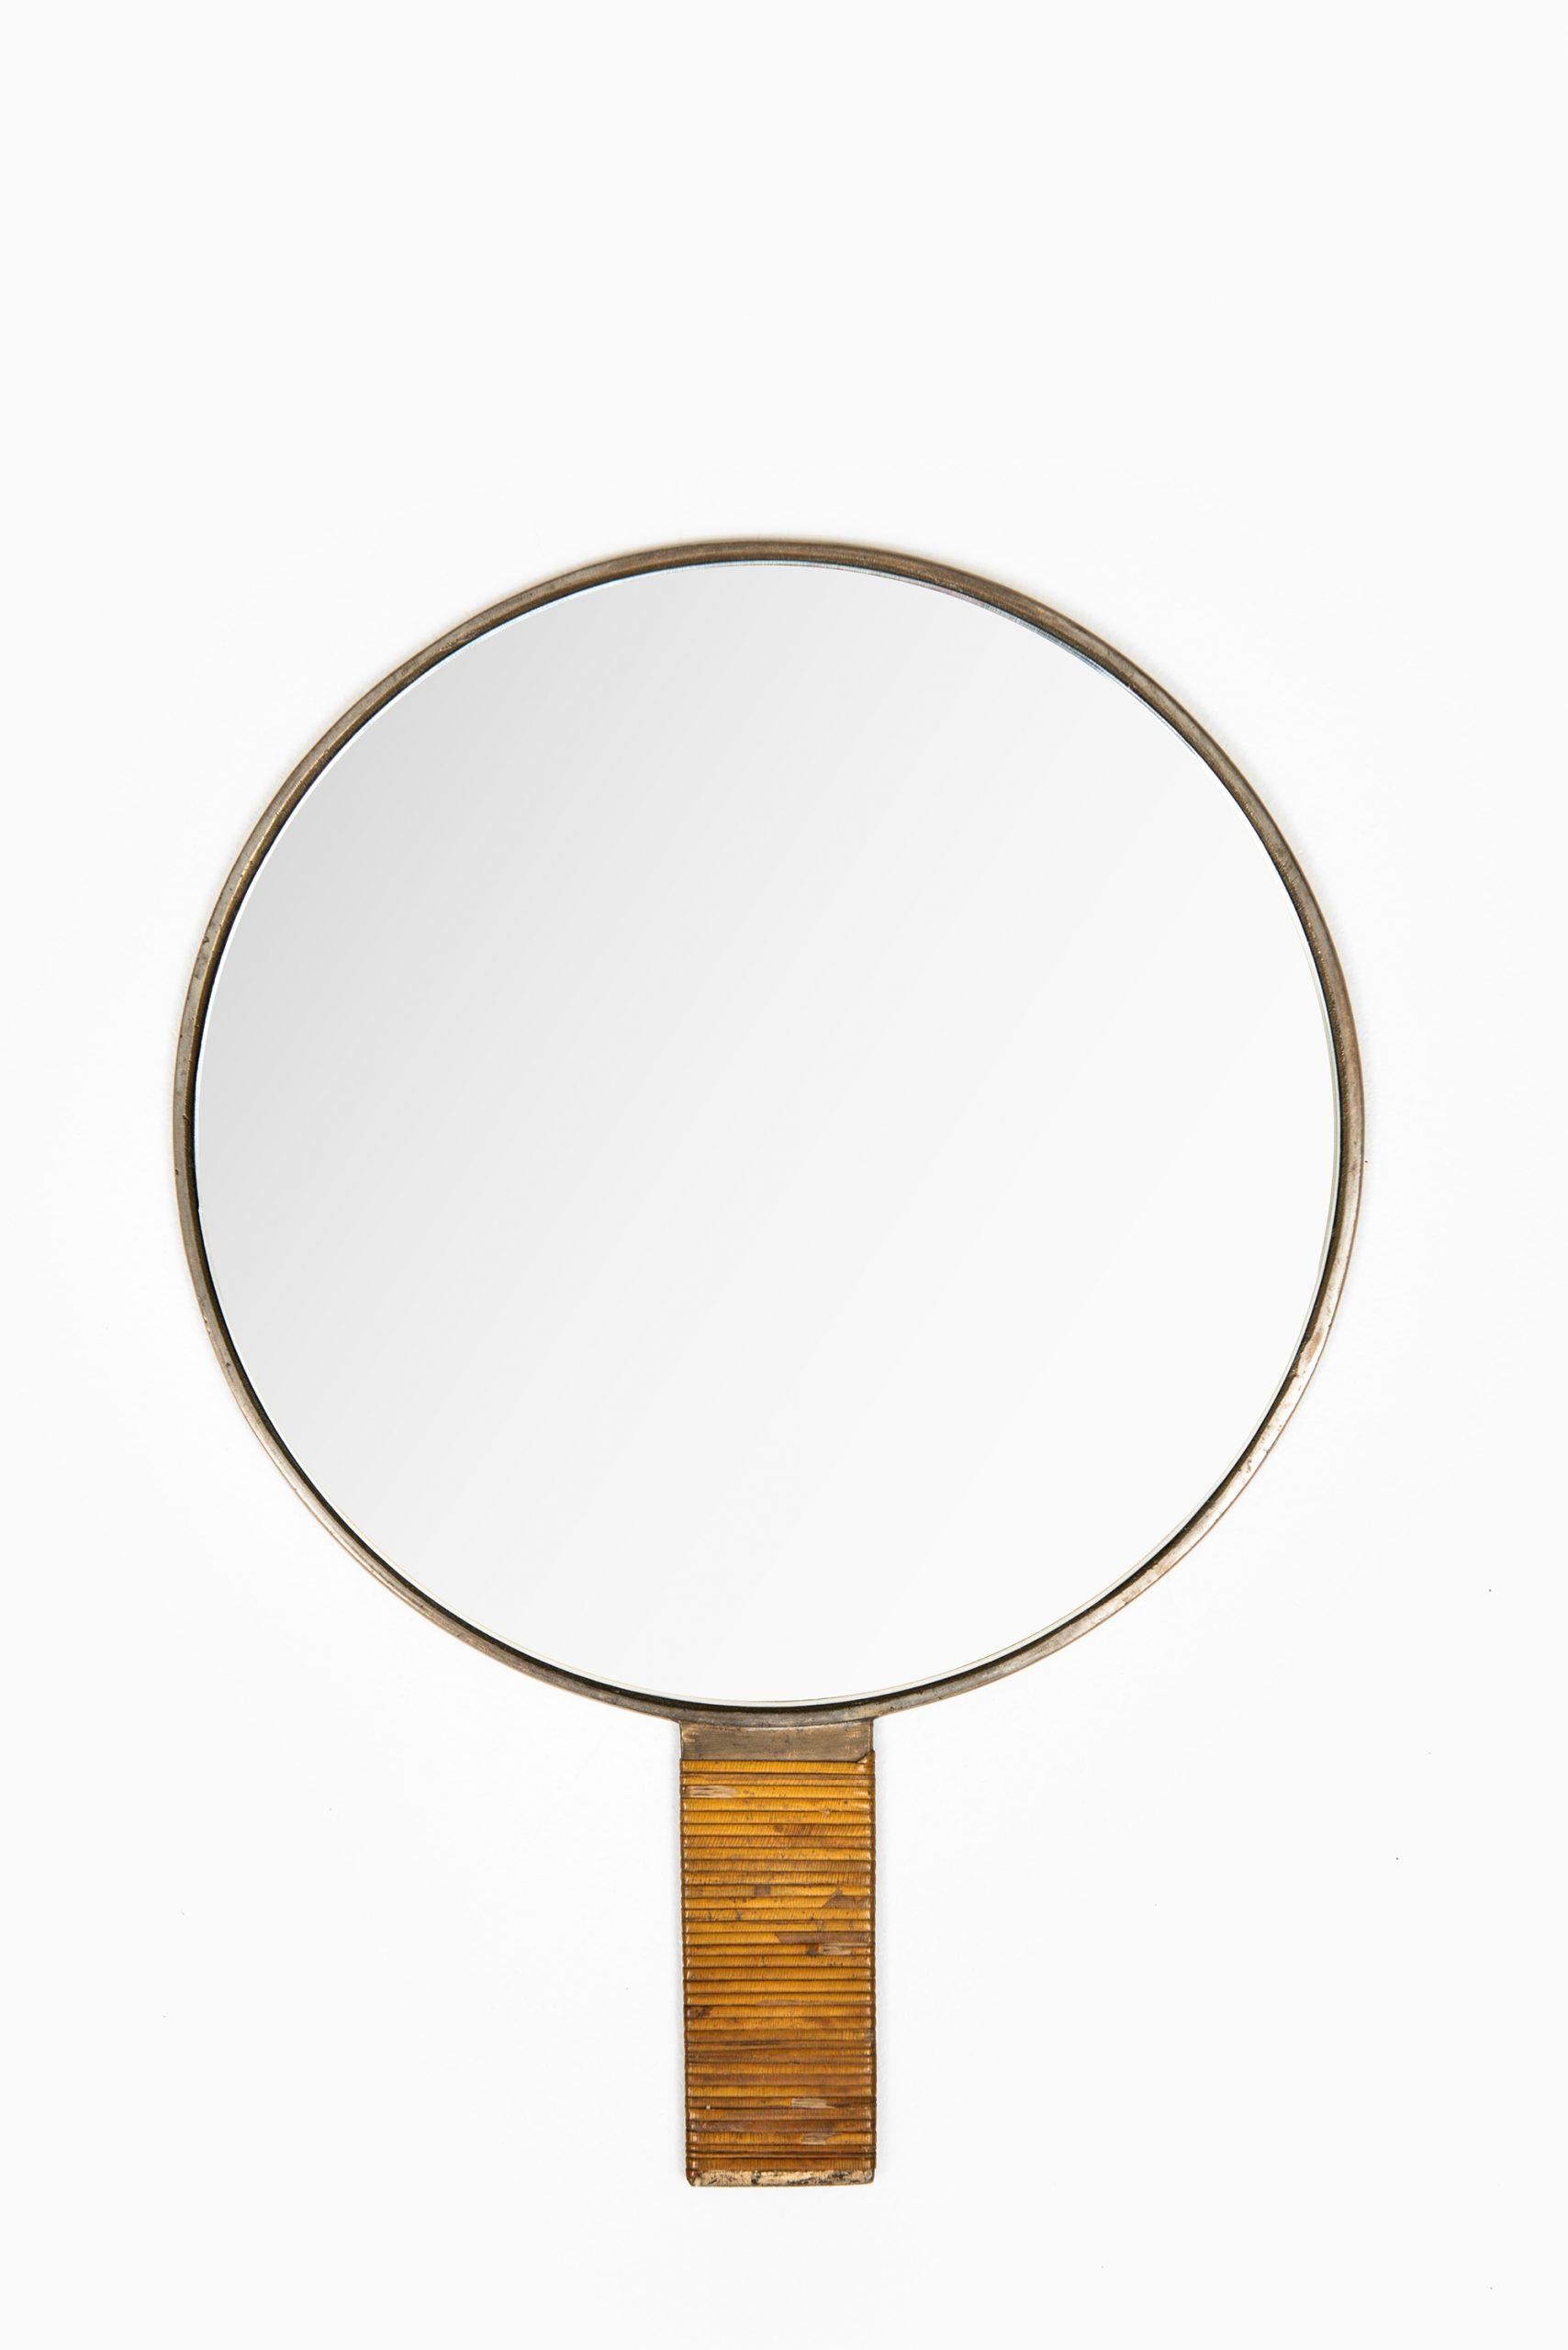 Scandinavian Modern Hand Mirror in the Style of Estric Ericsson Probably Produced in Sweden For Sale